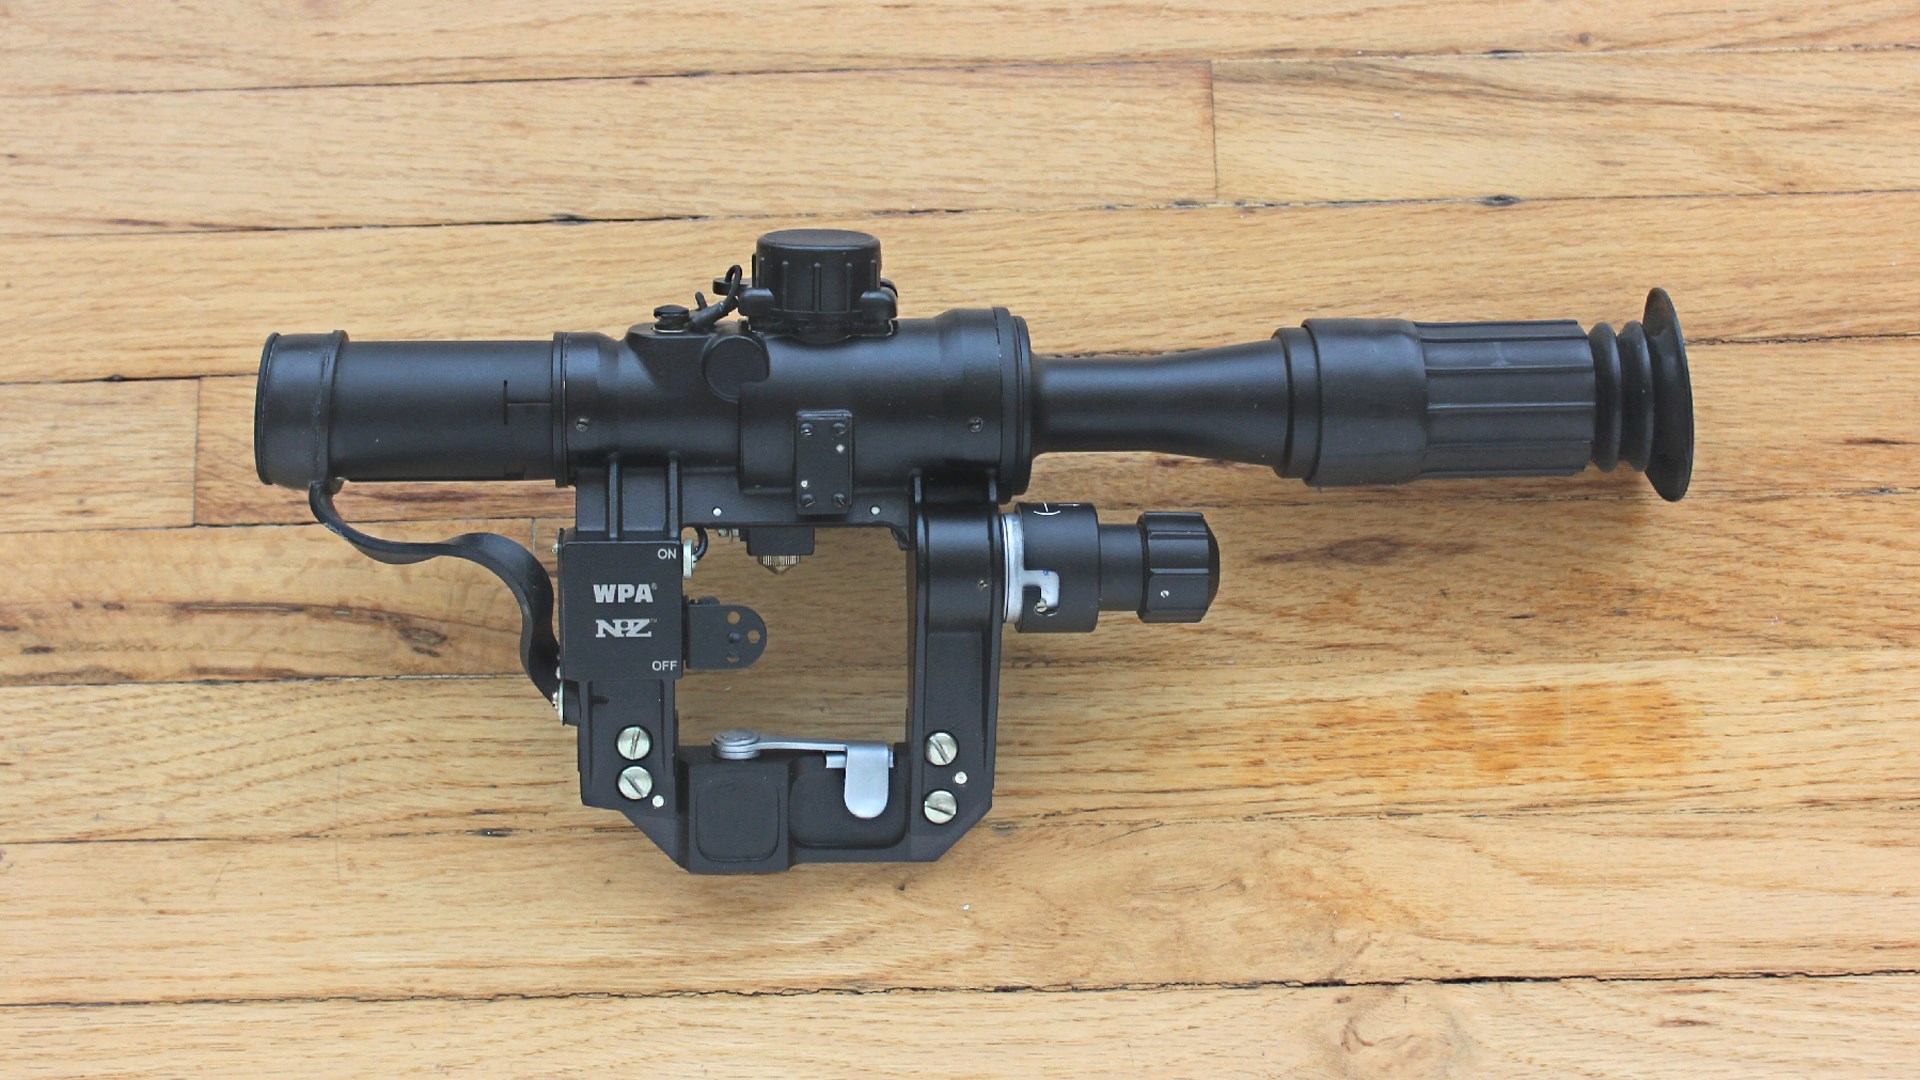 Century Arms PSL 54 riflescope left-side view on wood floor